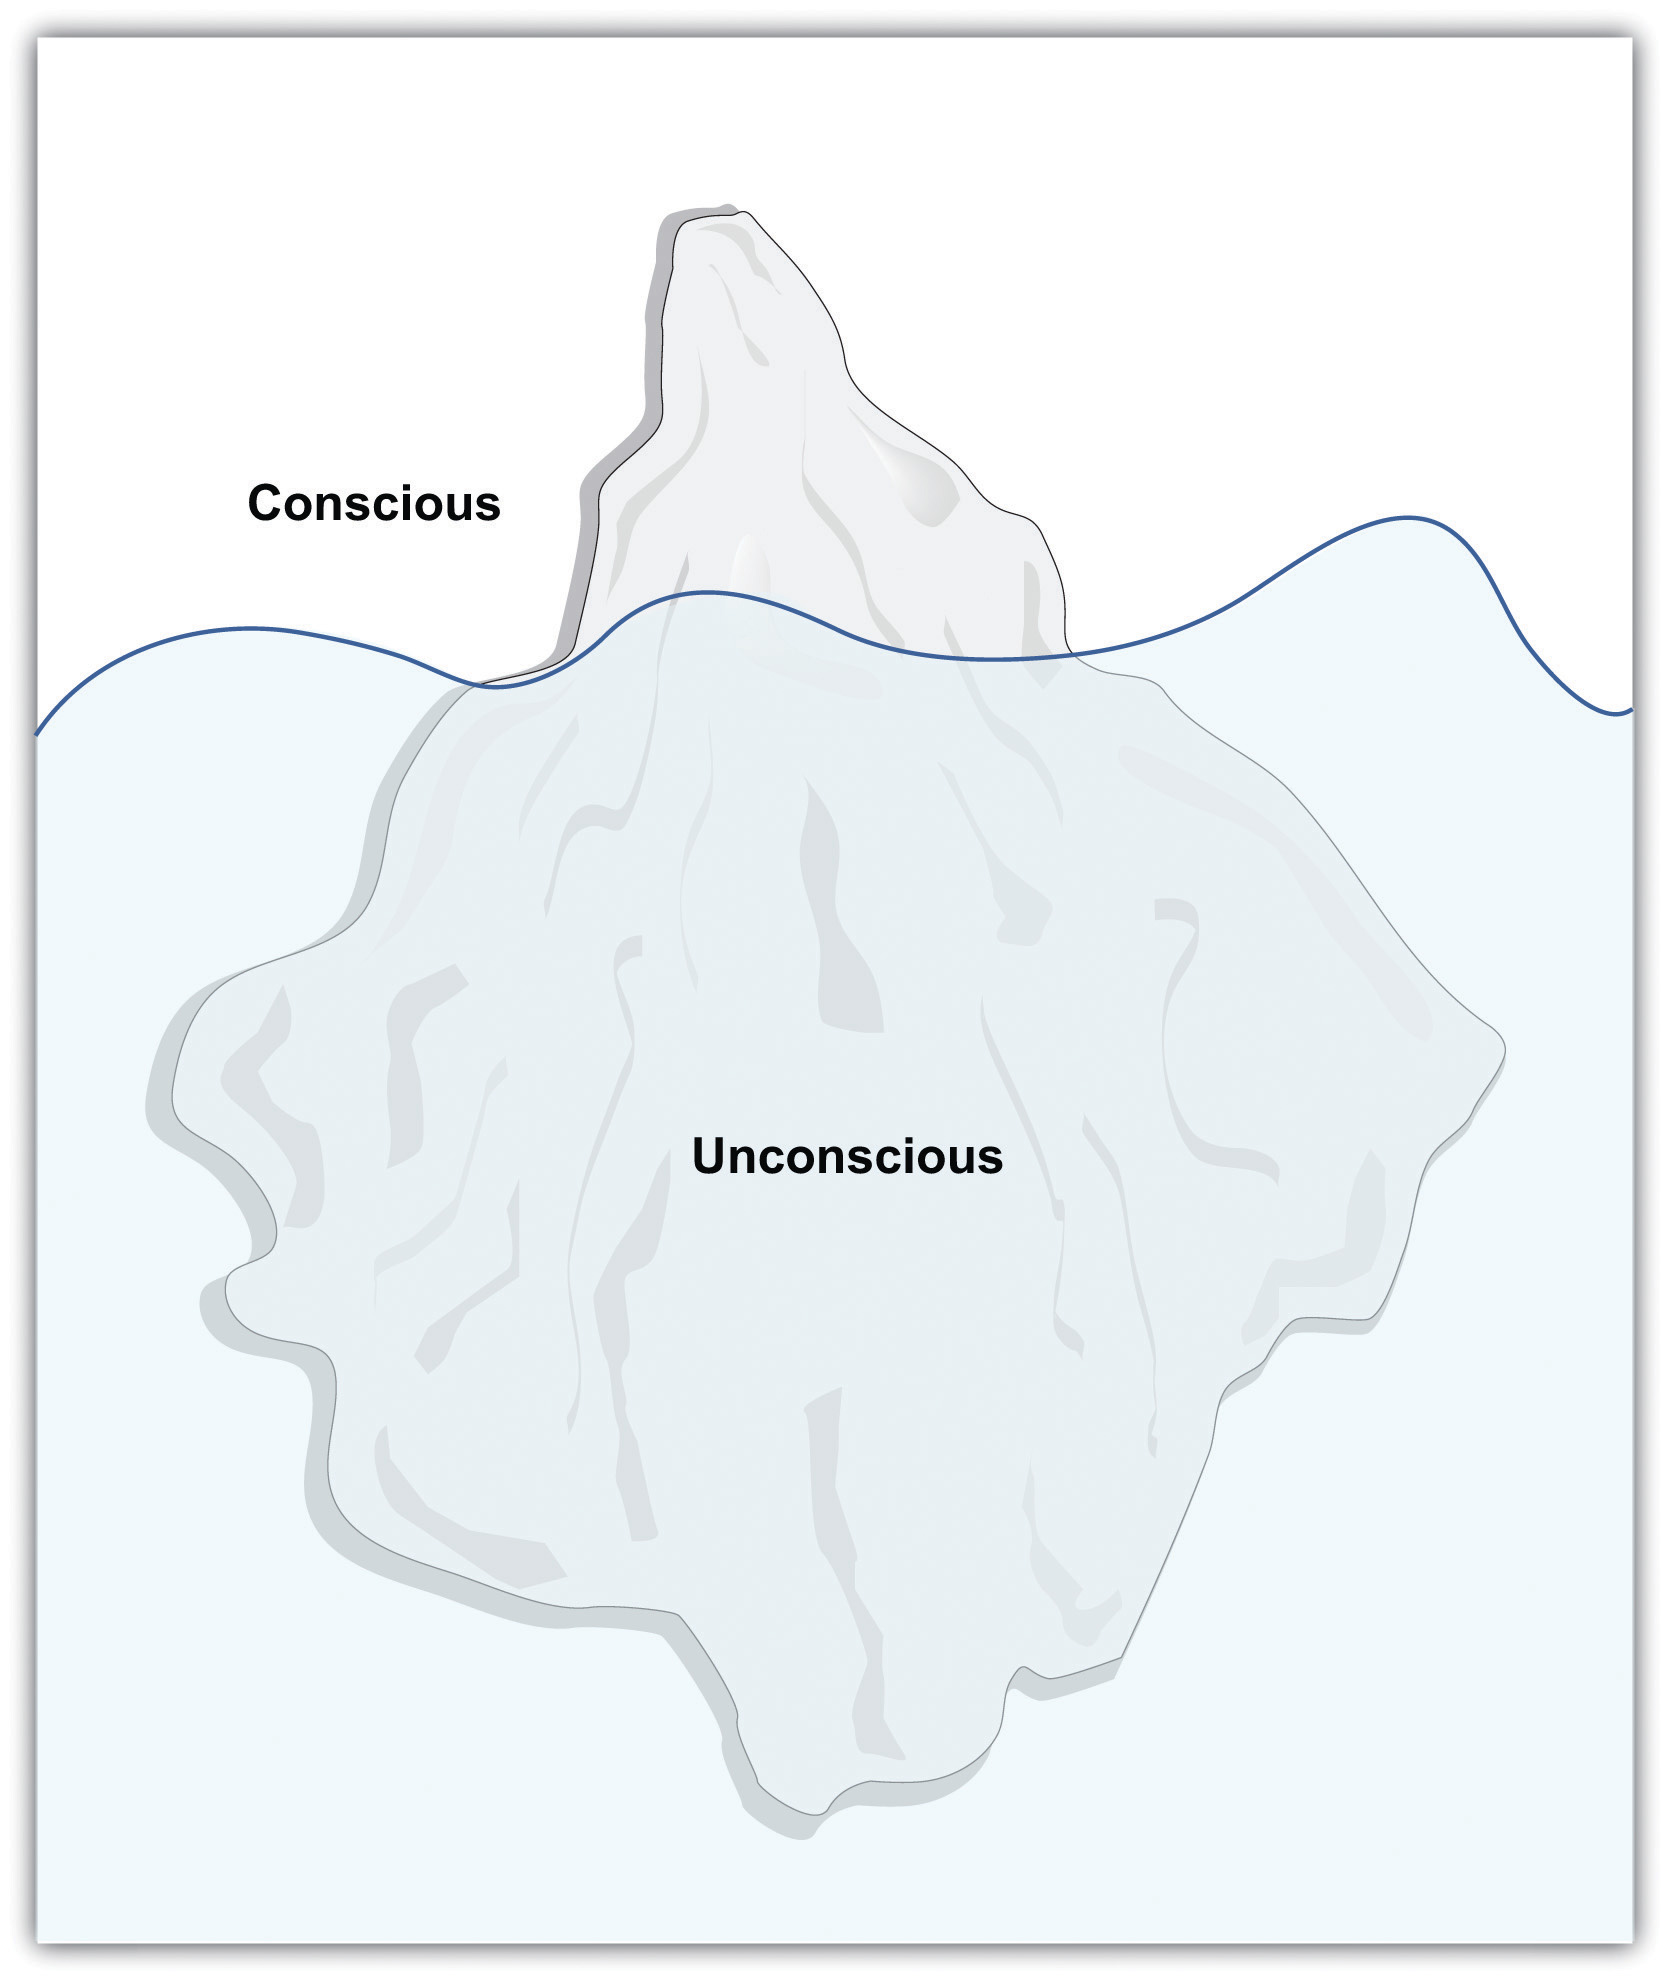 This diagram illustrates an iceberg, with the small portion above water labeled "conscious" and the large portion under water labeled "unconscious."